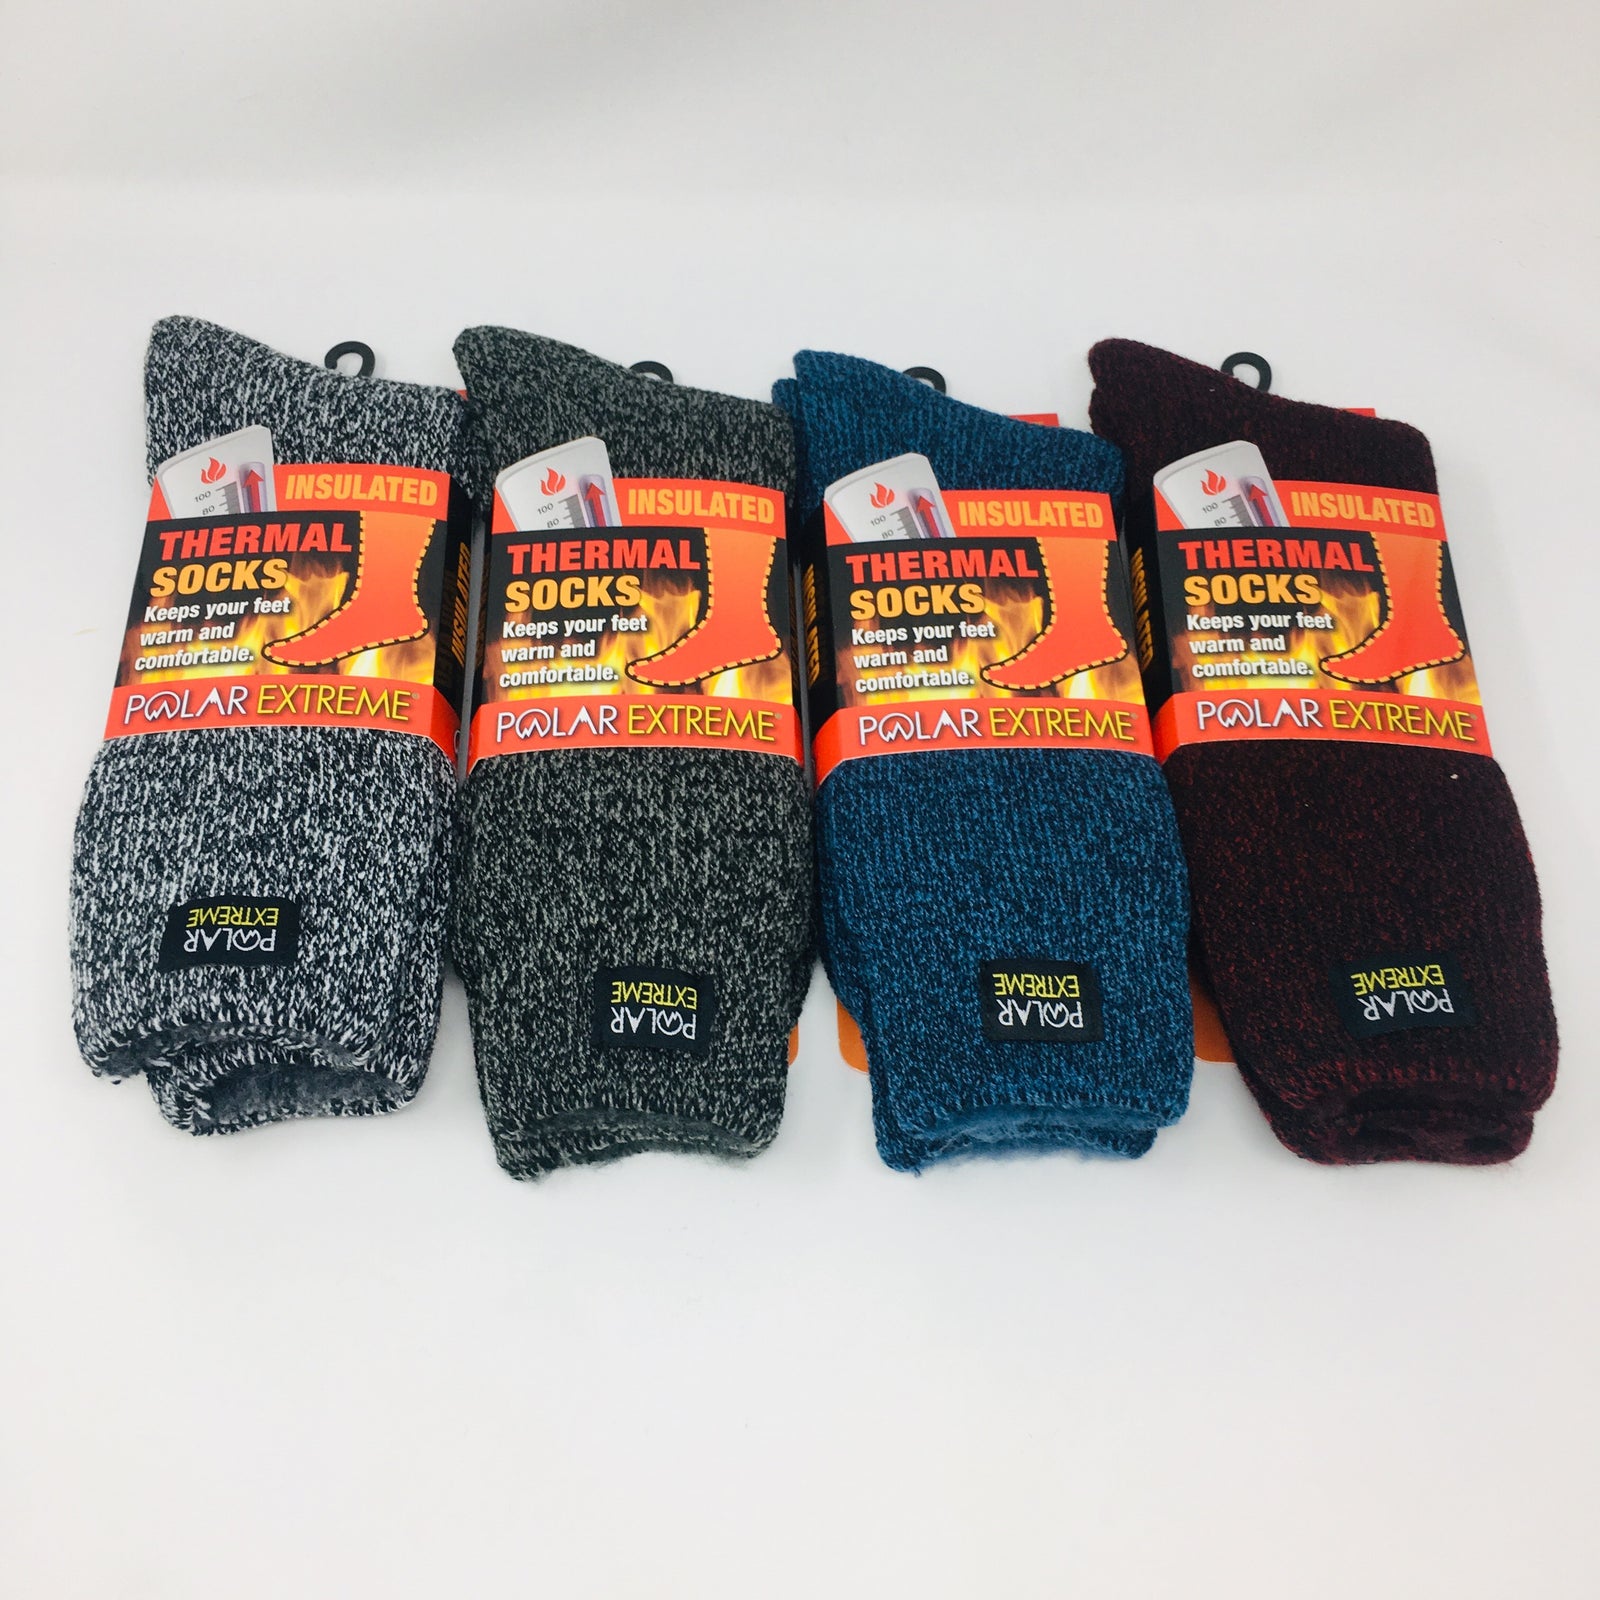 2 PAIRS POLAR EXTREME WOMEN INSULATED Thermal Socks Shoe Size 5-9